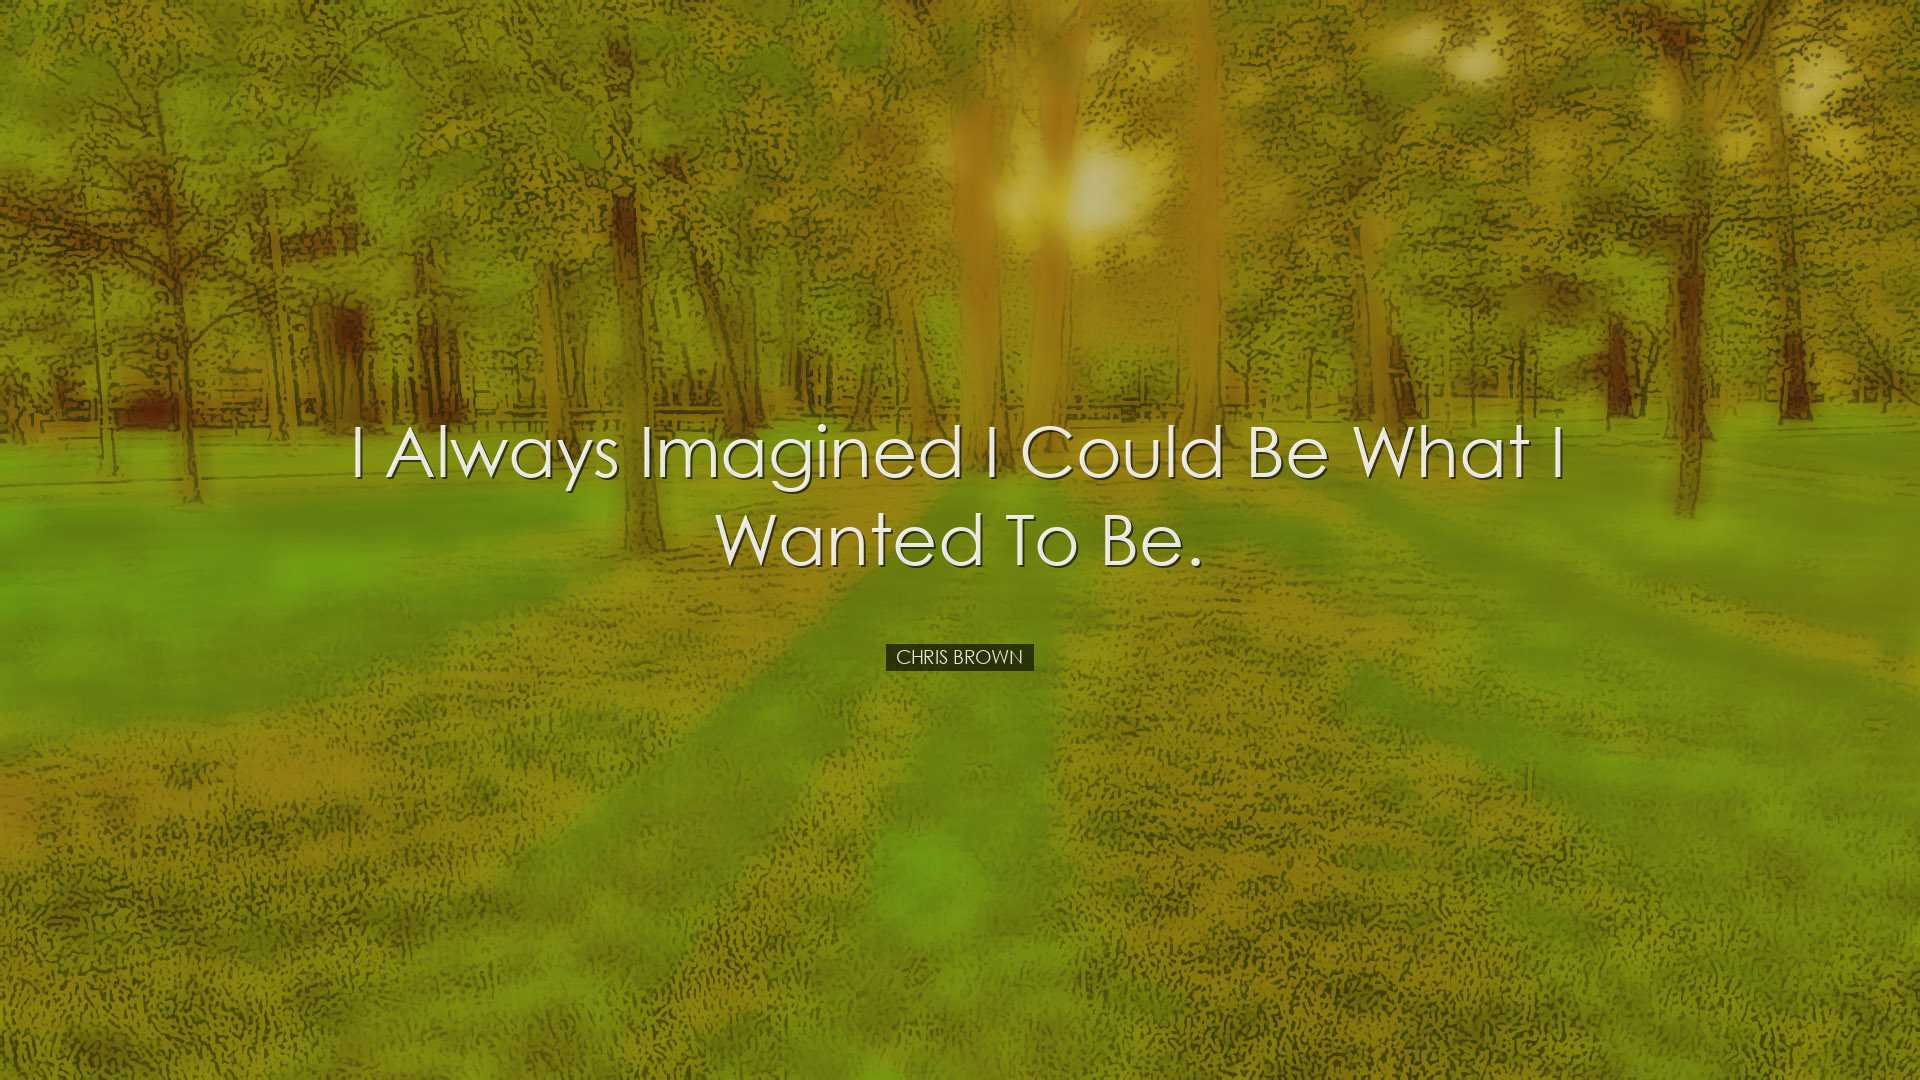 I always imagined I could be what I wanted to be. - Chris Brown